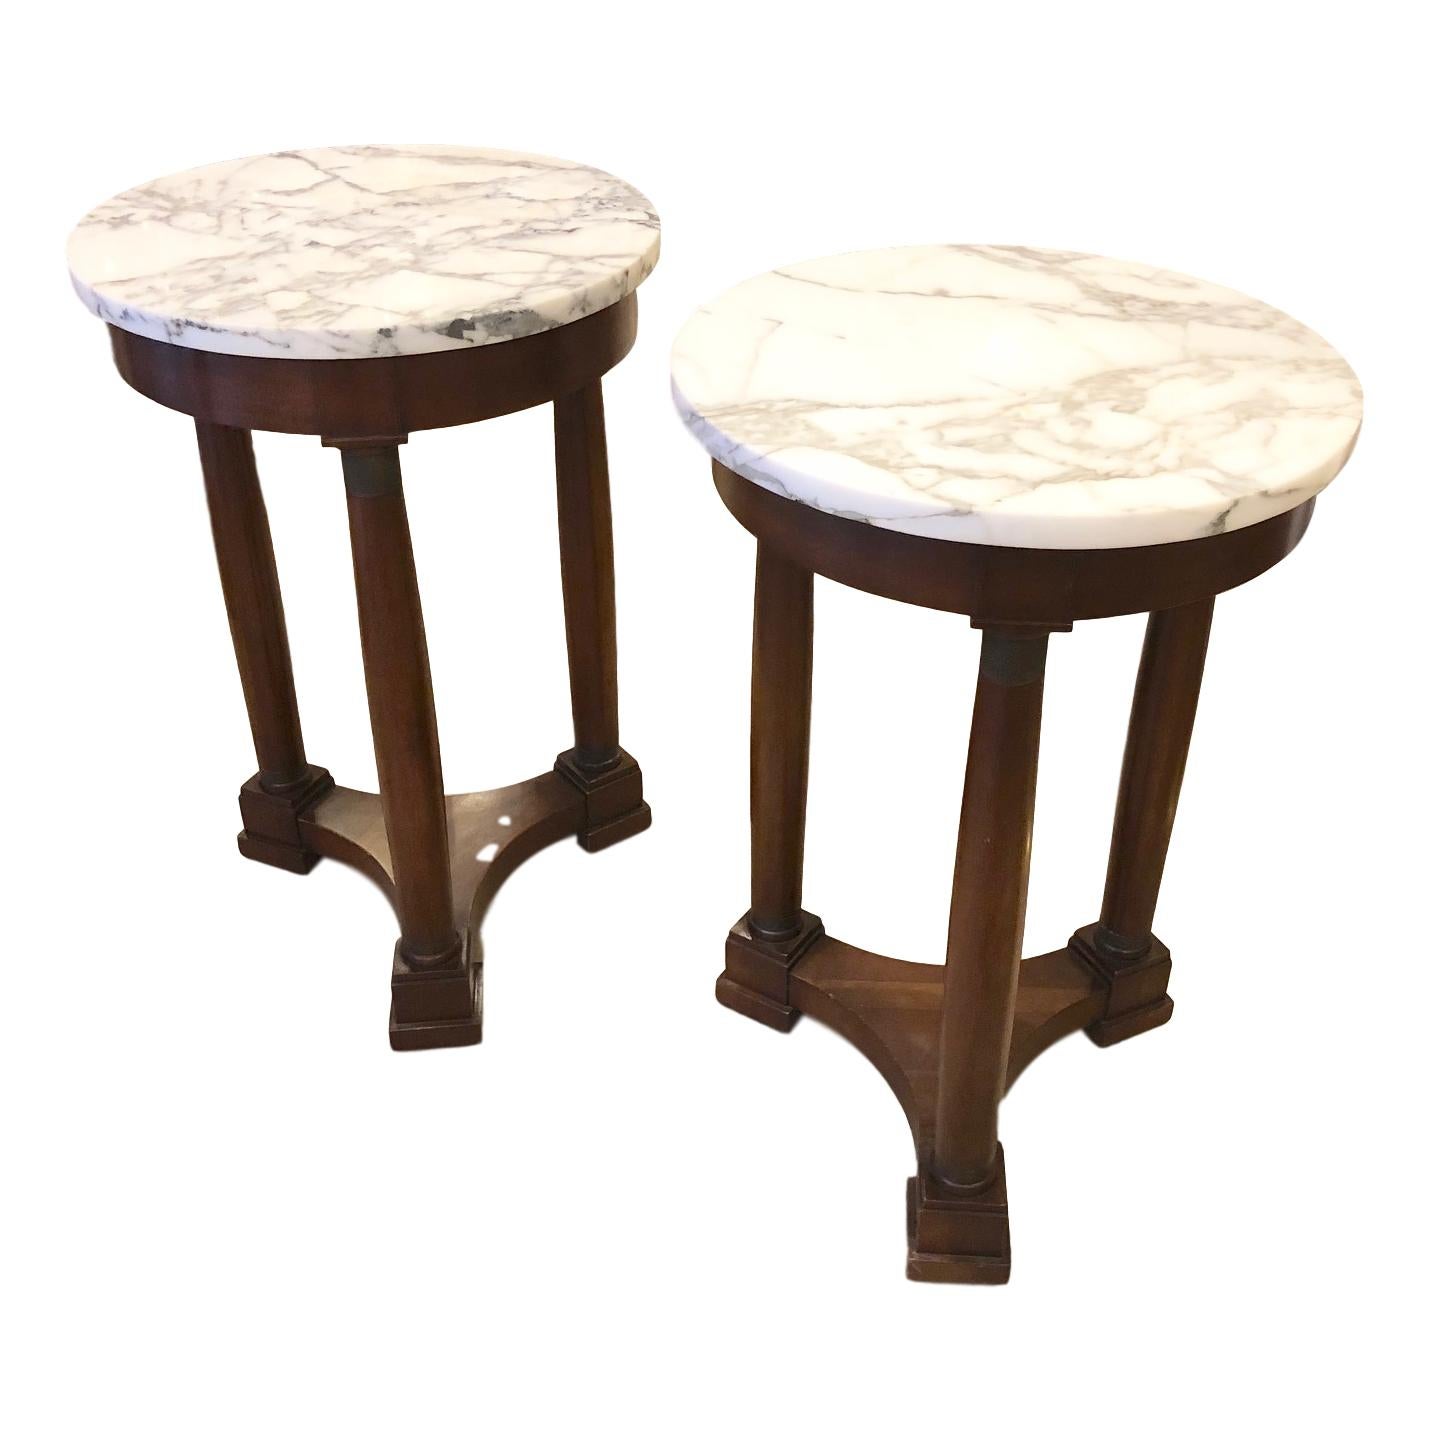 A pair of circa 1940s French neoclassic style marble-top side tables.

Measurements:
Height 25.5